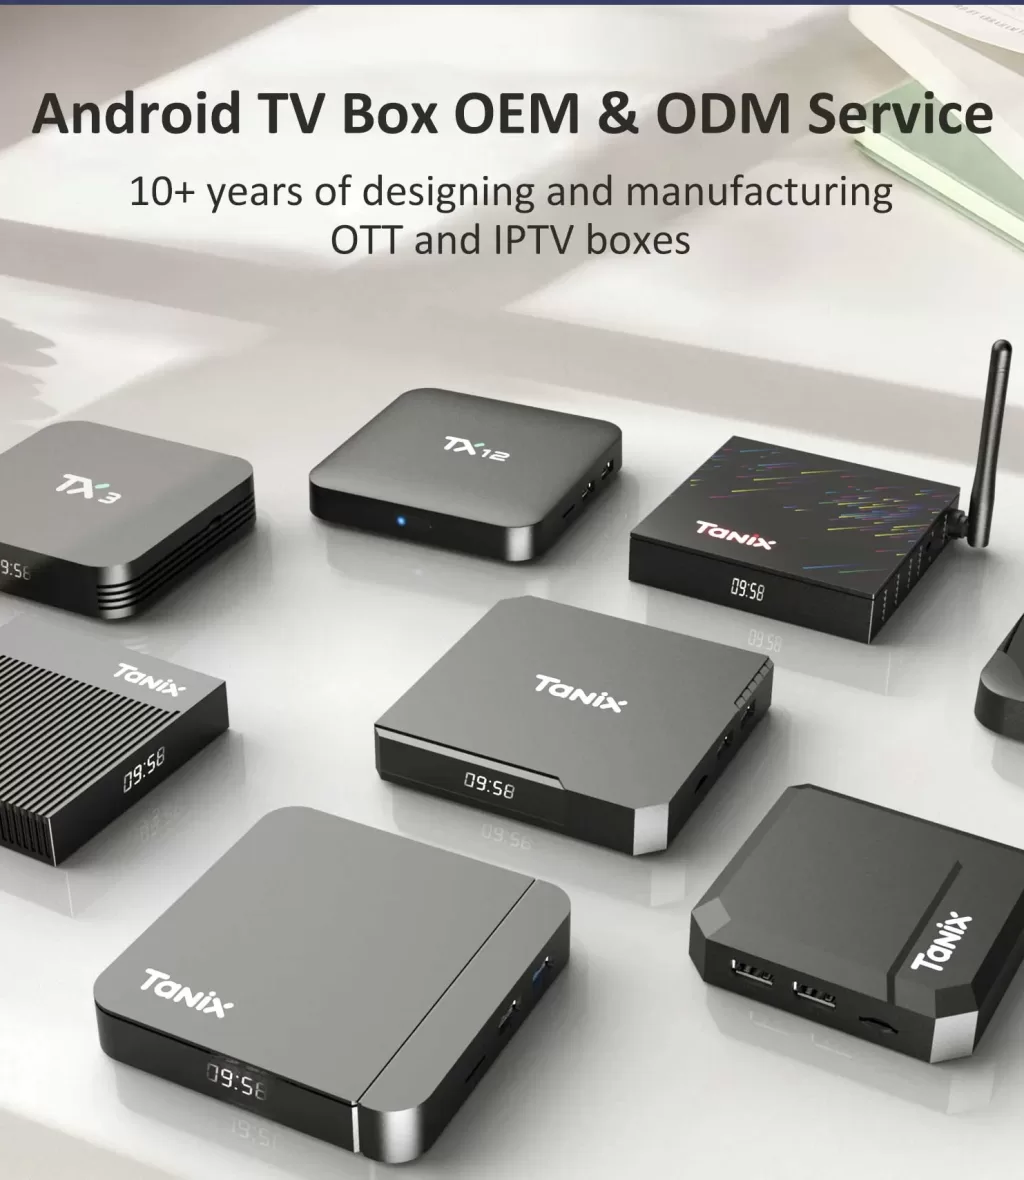 Android TV Box OEM ODM Services